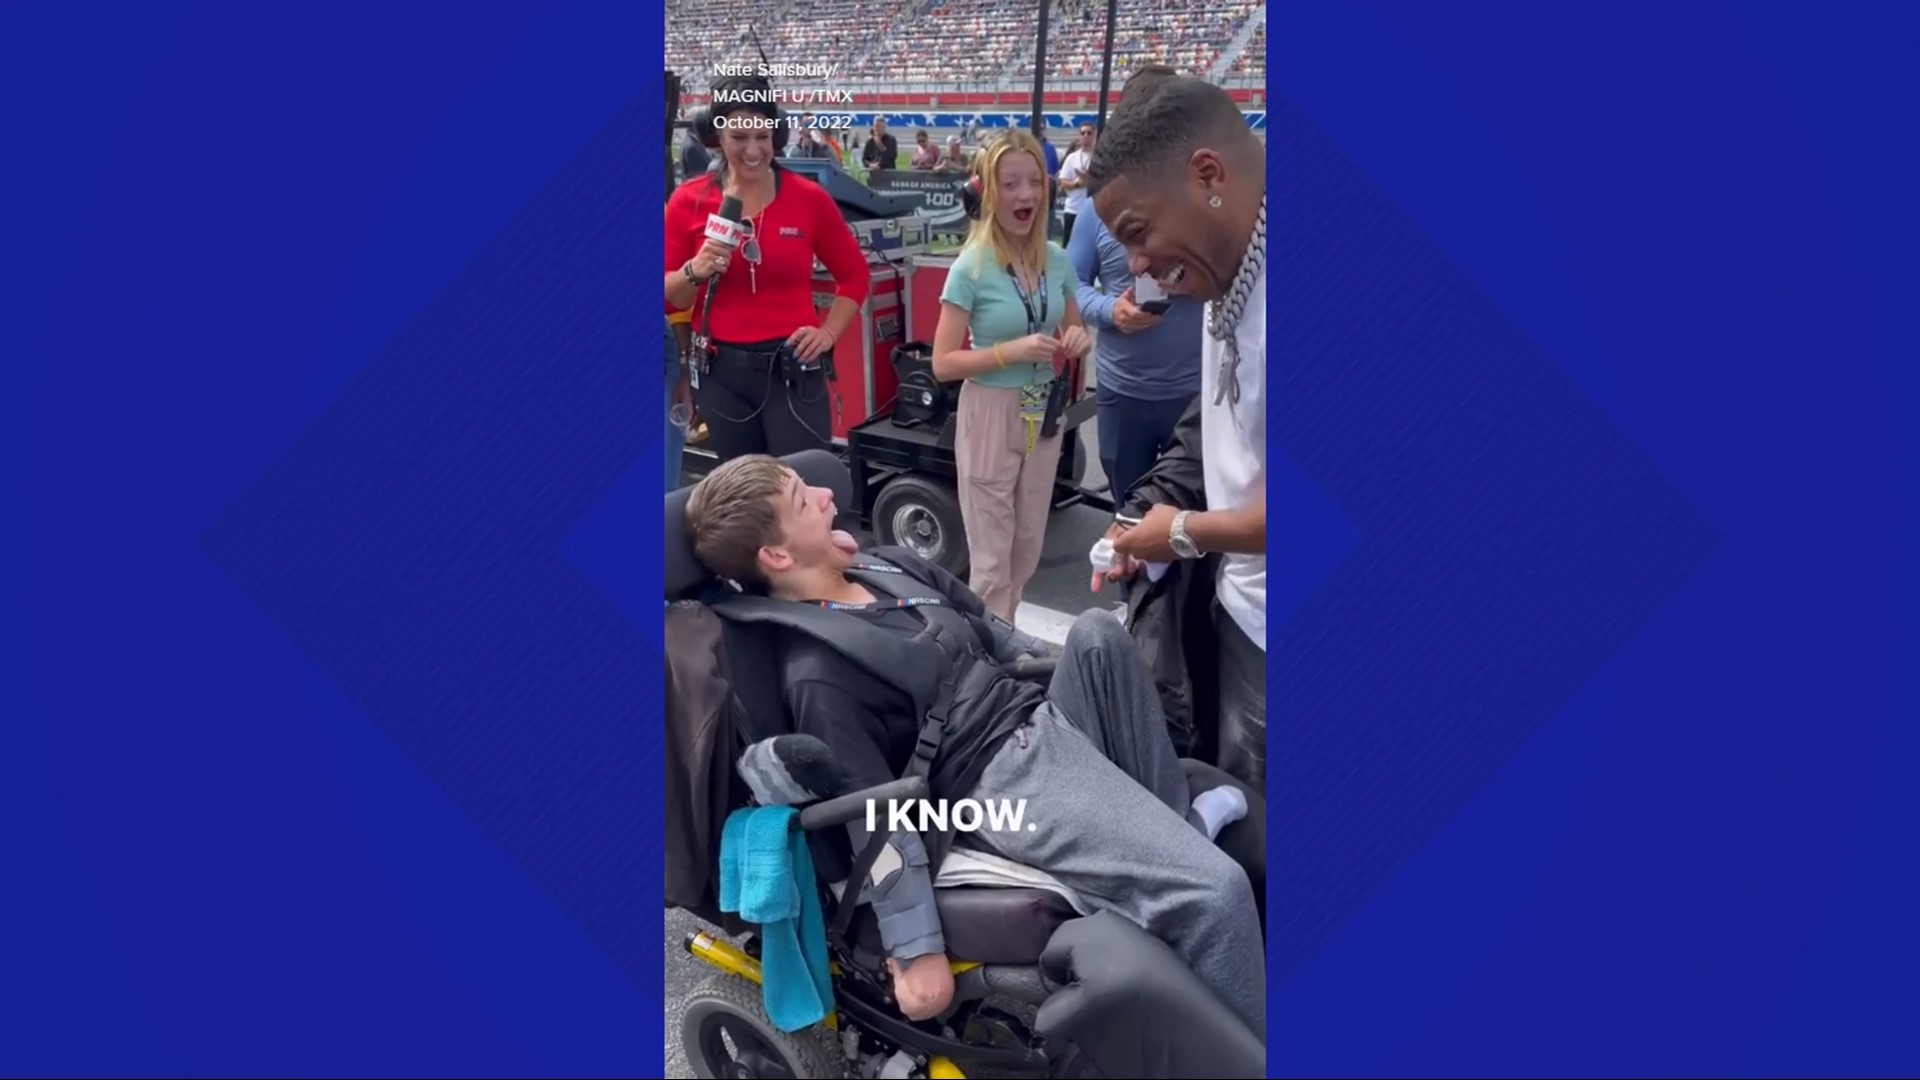 Nelly gives his jacket to a fan at Charlotte Motor Speedway. The you man was born with Lesch-Nyhan Syndrome. This was in October 2022.